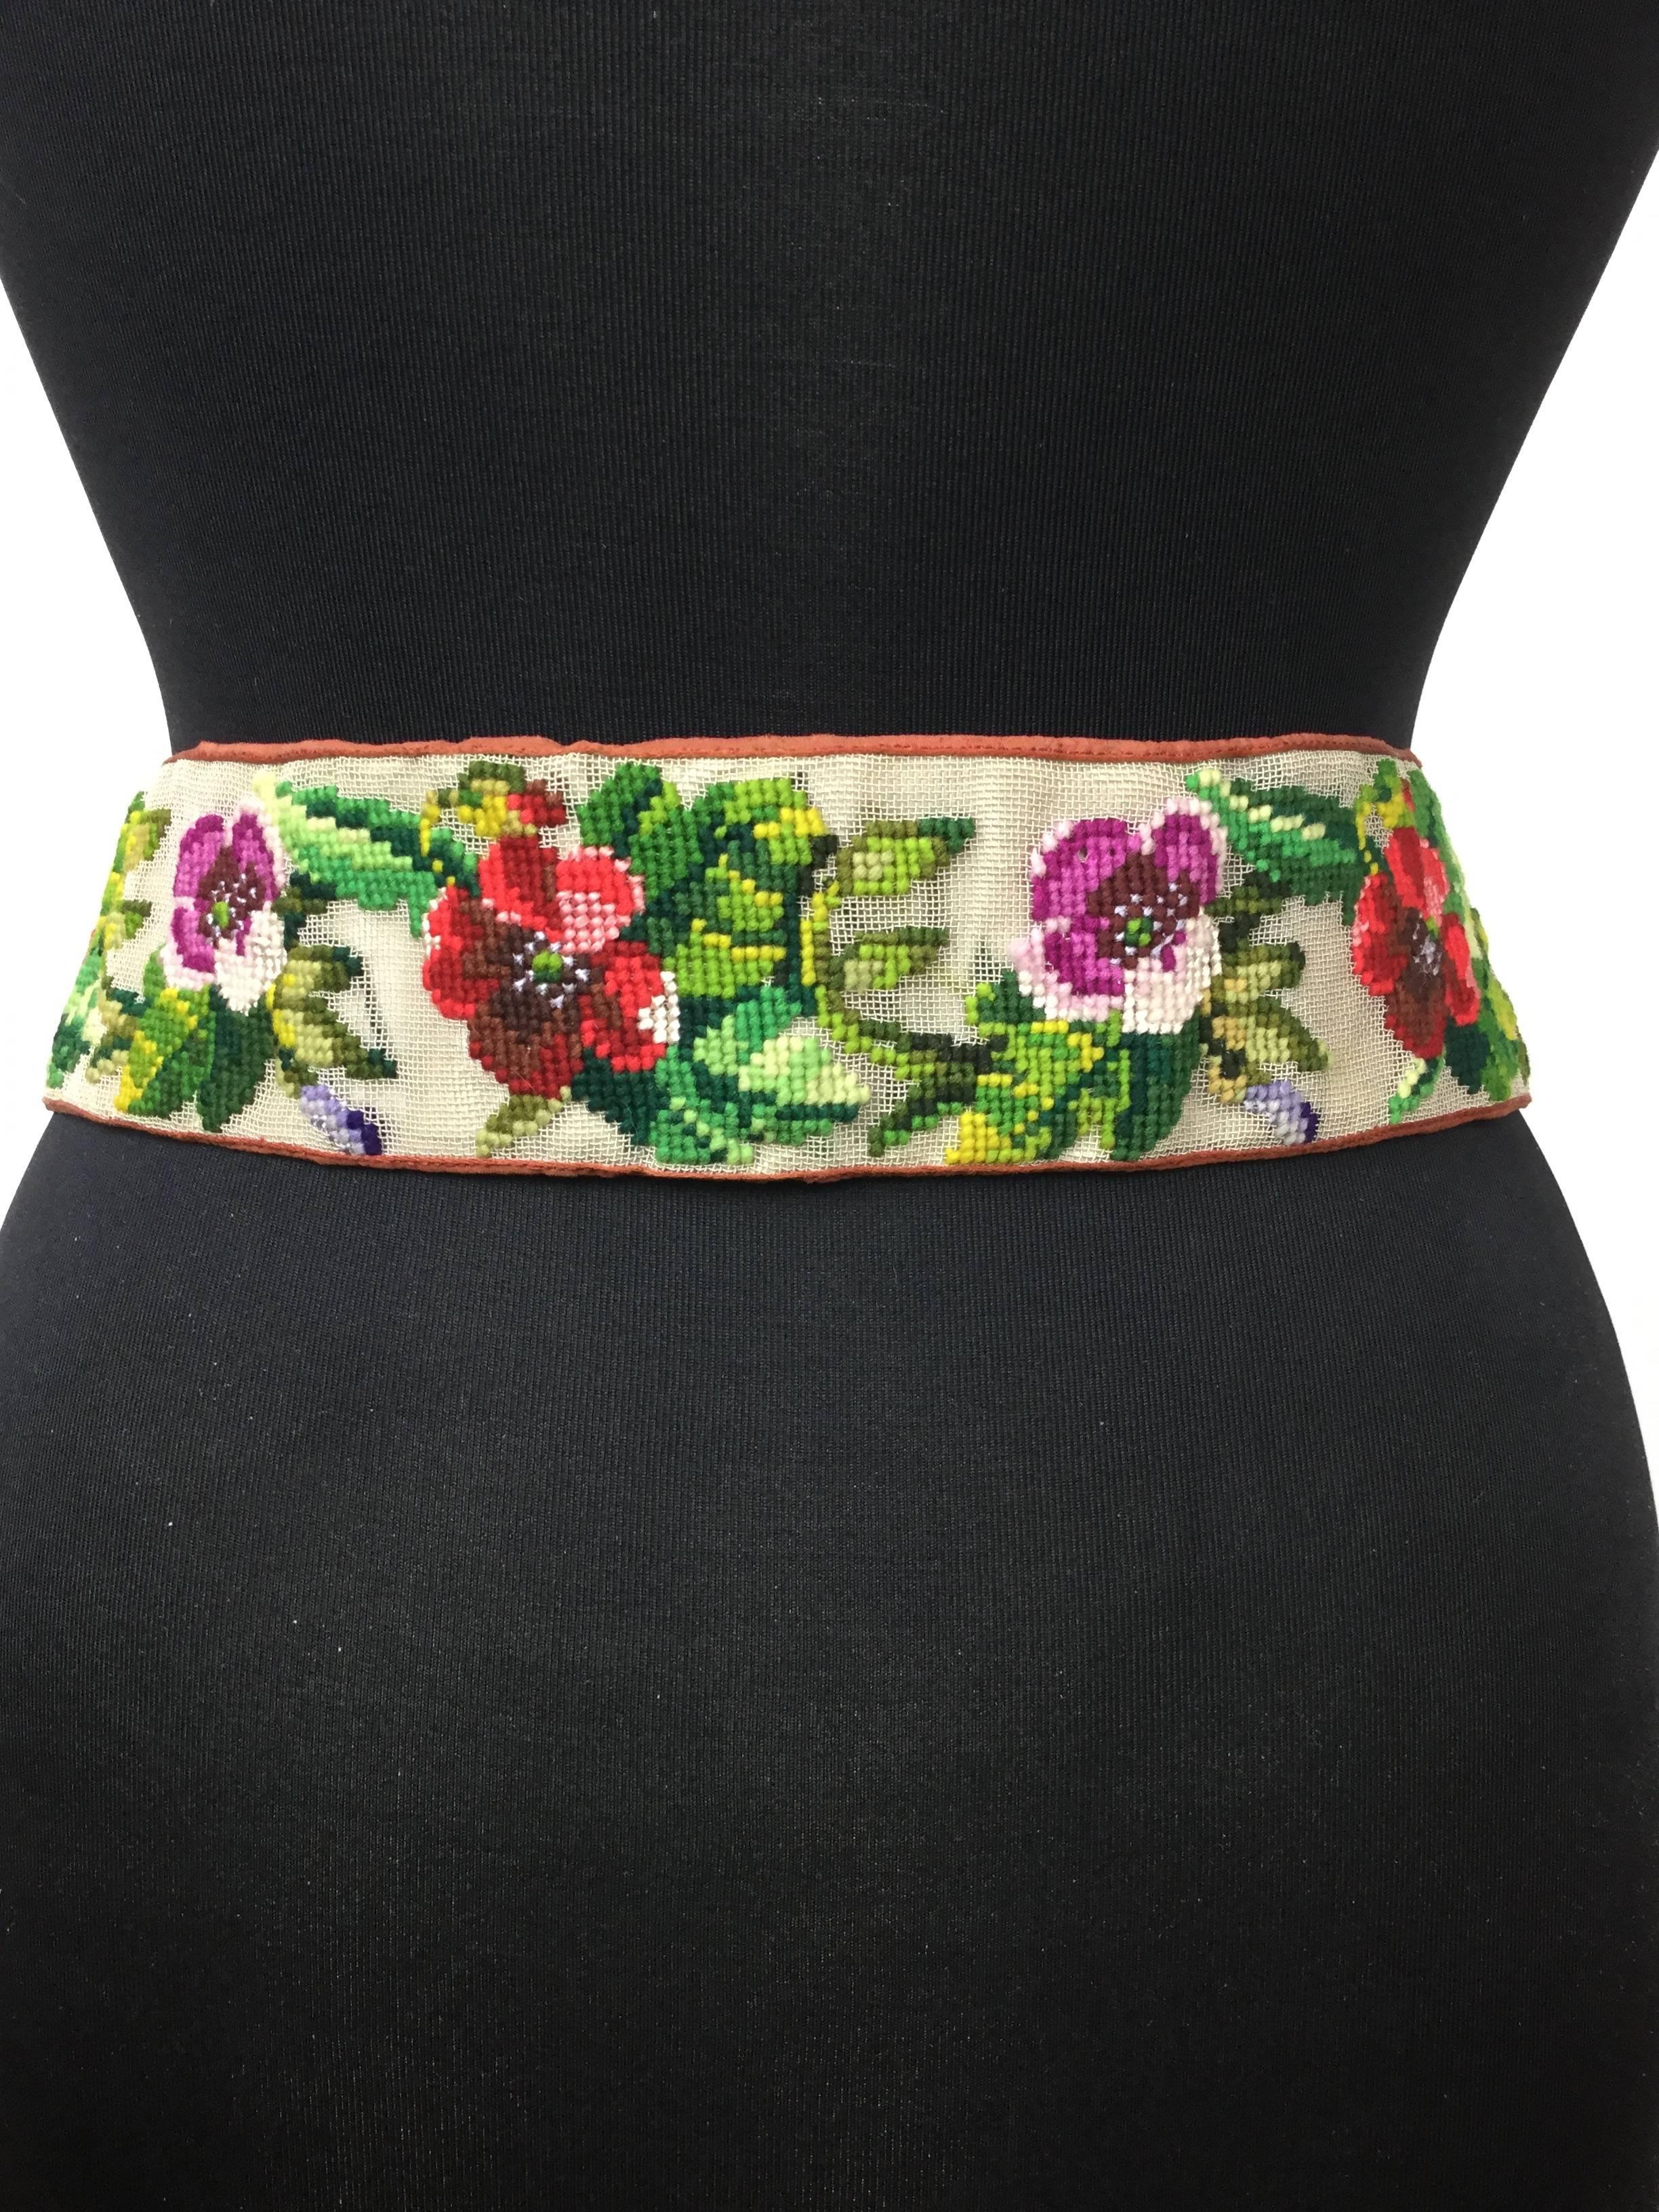 This super rare hand made Victorian needlepoint belt features a garden of Berlin Wool Work floral embroideries.  The colors are incredibly rich and vibrant for a piece of this age. It closes with an anchor themed gold plated metal buckle. The